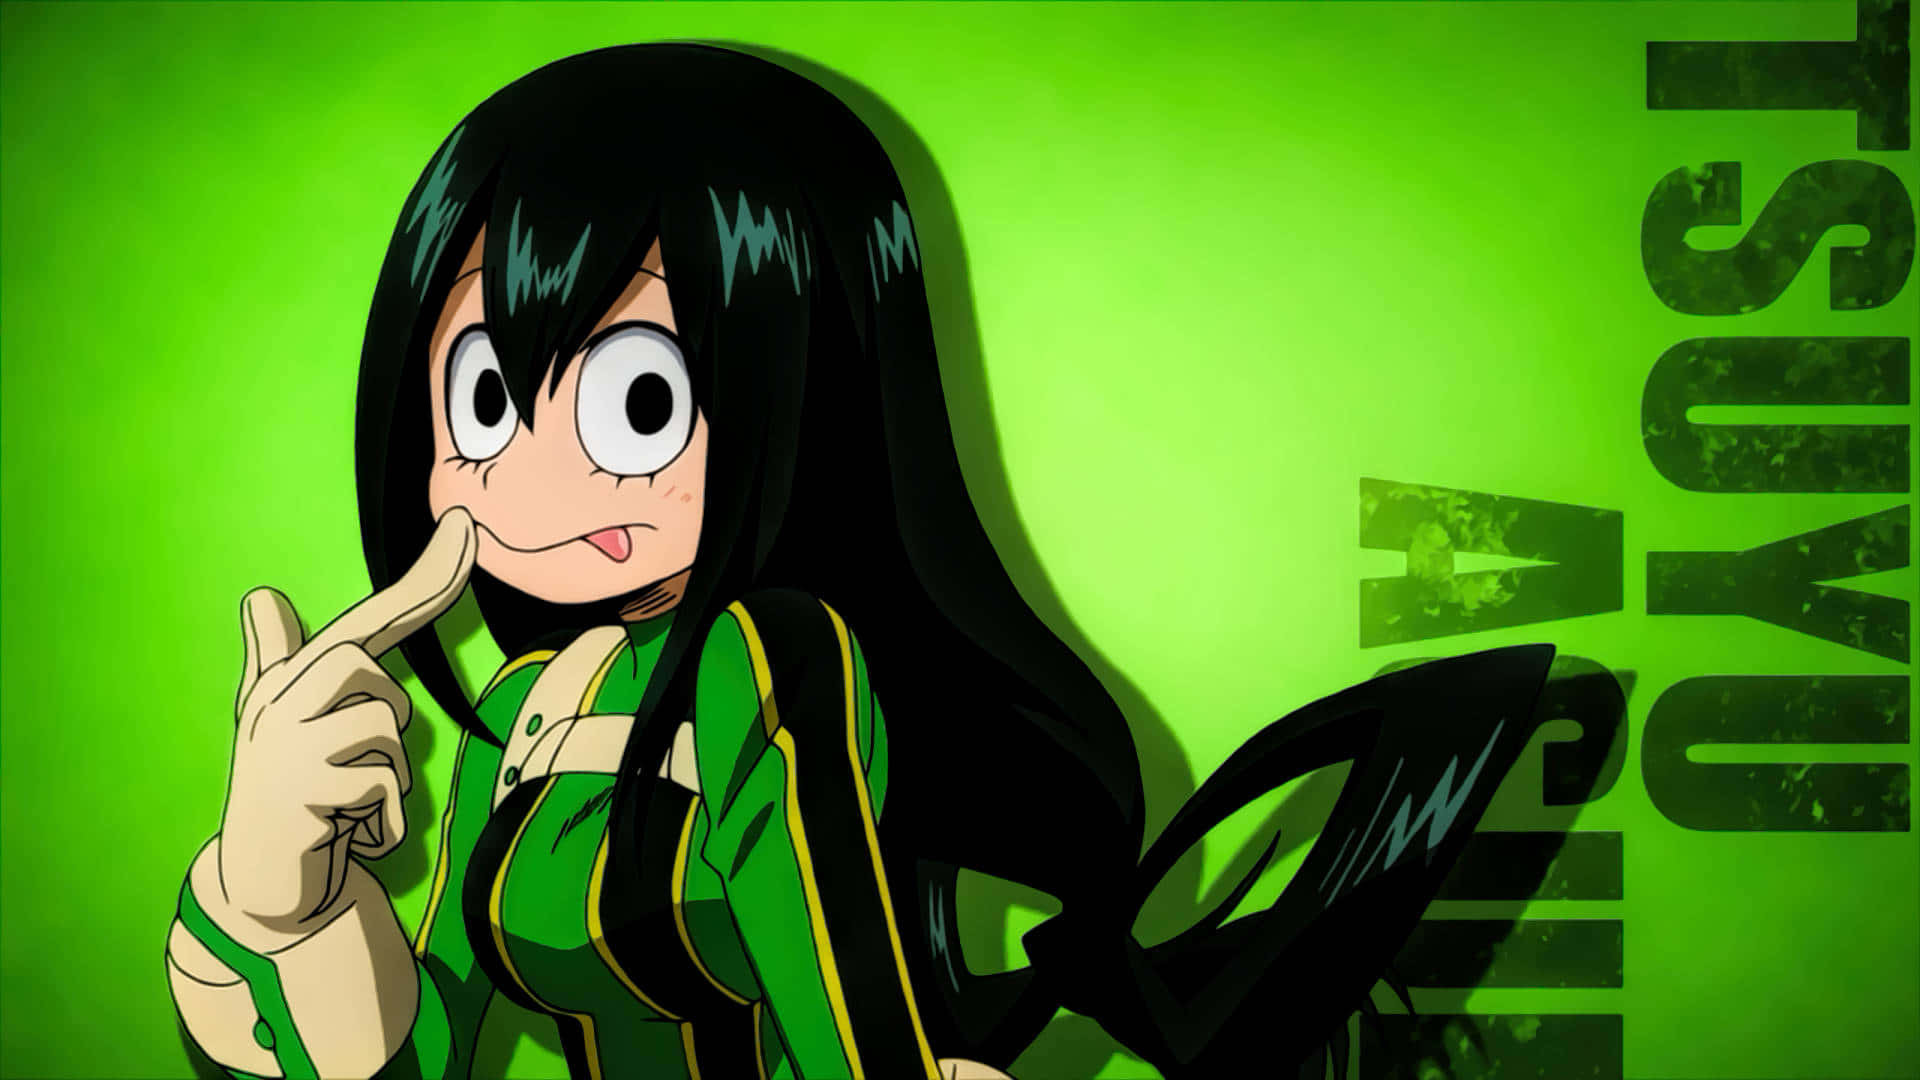 The one, the only Froppy!